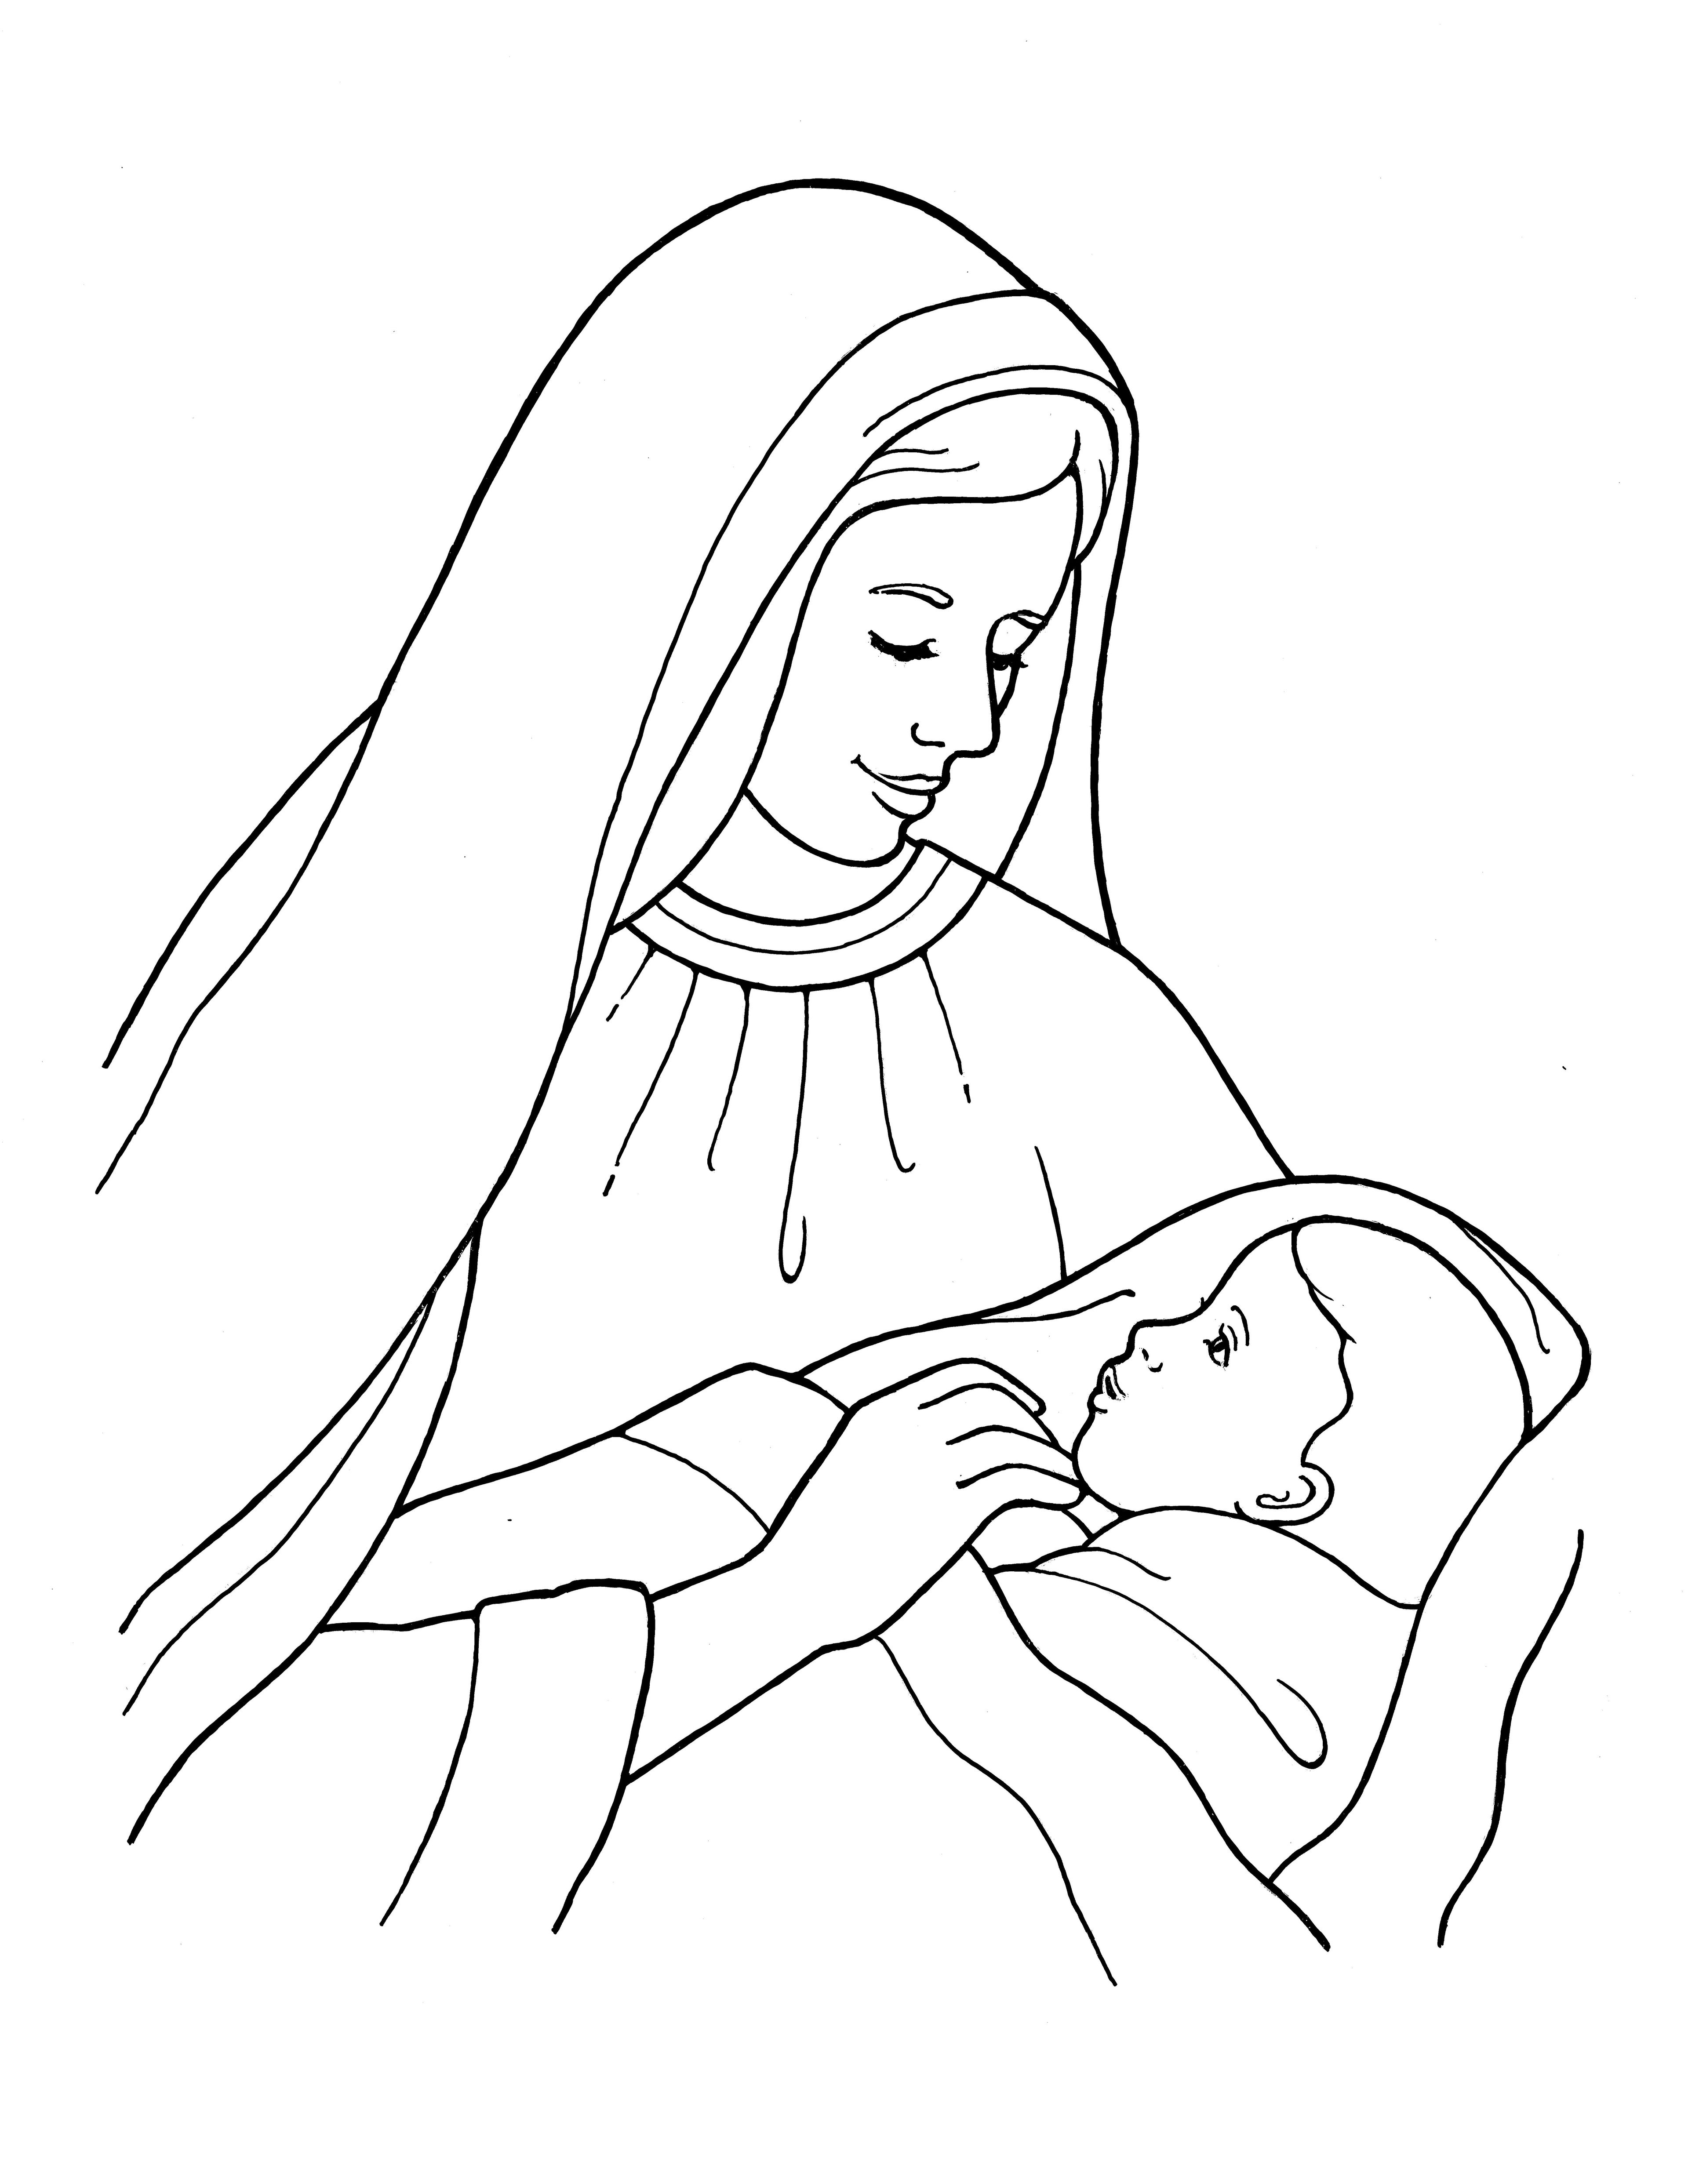 An illustration of Mary holding the baby Jesus, from the nursery manual Behold Your Little Ones (2008), page 127.